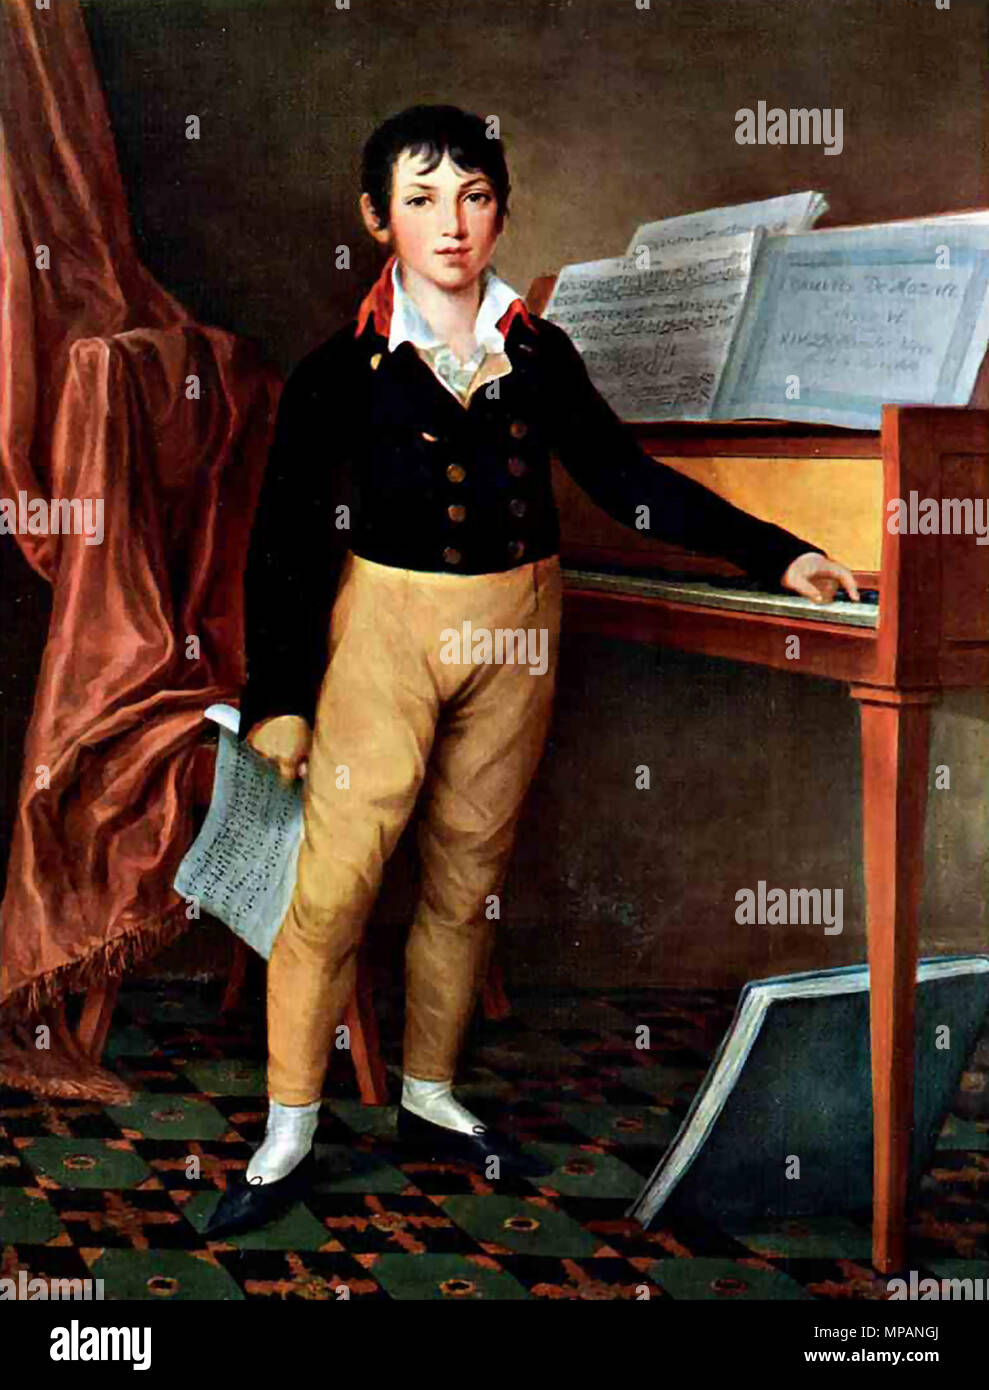 . French: Giacomo Meyerbeer à l'âge de 11 ans . 1802.    Friedrich Georg Weitsch  (1758–1828)    Description German painter and engraver  Date of birth/death 8 August 1758 30 May 1828  Location of birth/death Brunswick Berlin  Work location Berlin, Brunswick  Authority control  : Q323498 VIAF: 64818540 ISNI: 0000 0000 6663 6002 ULAN: 500009312 LCCN: nr2005021718 GND: 119489694 WorldCat 886 Meyerbeer at11 Weitsch Stock Photo